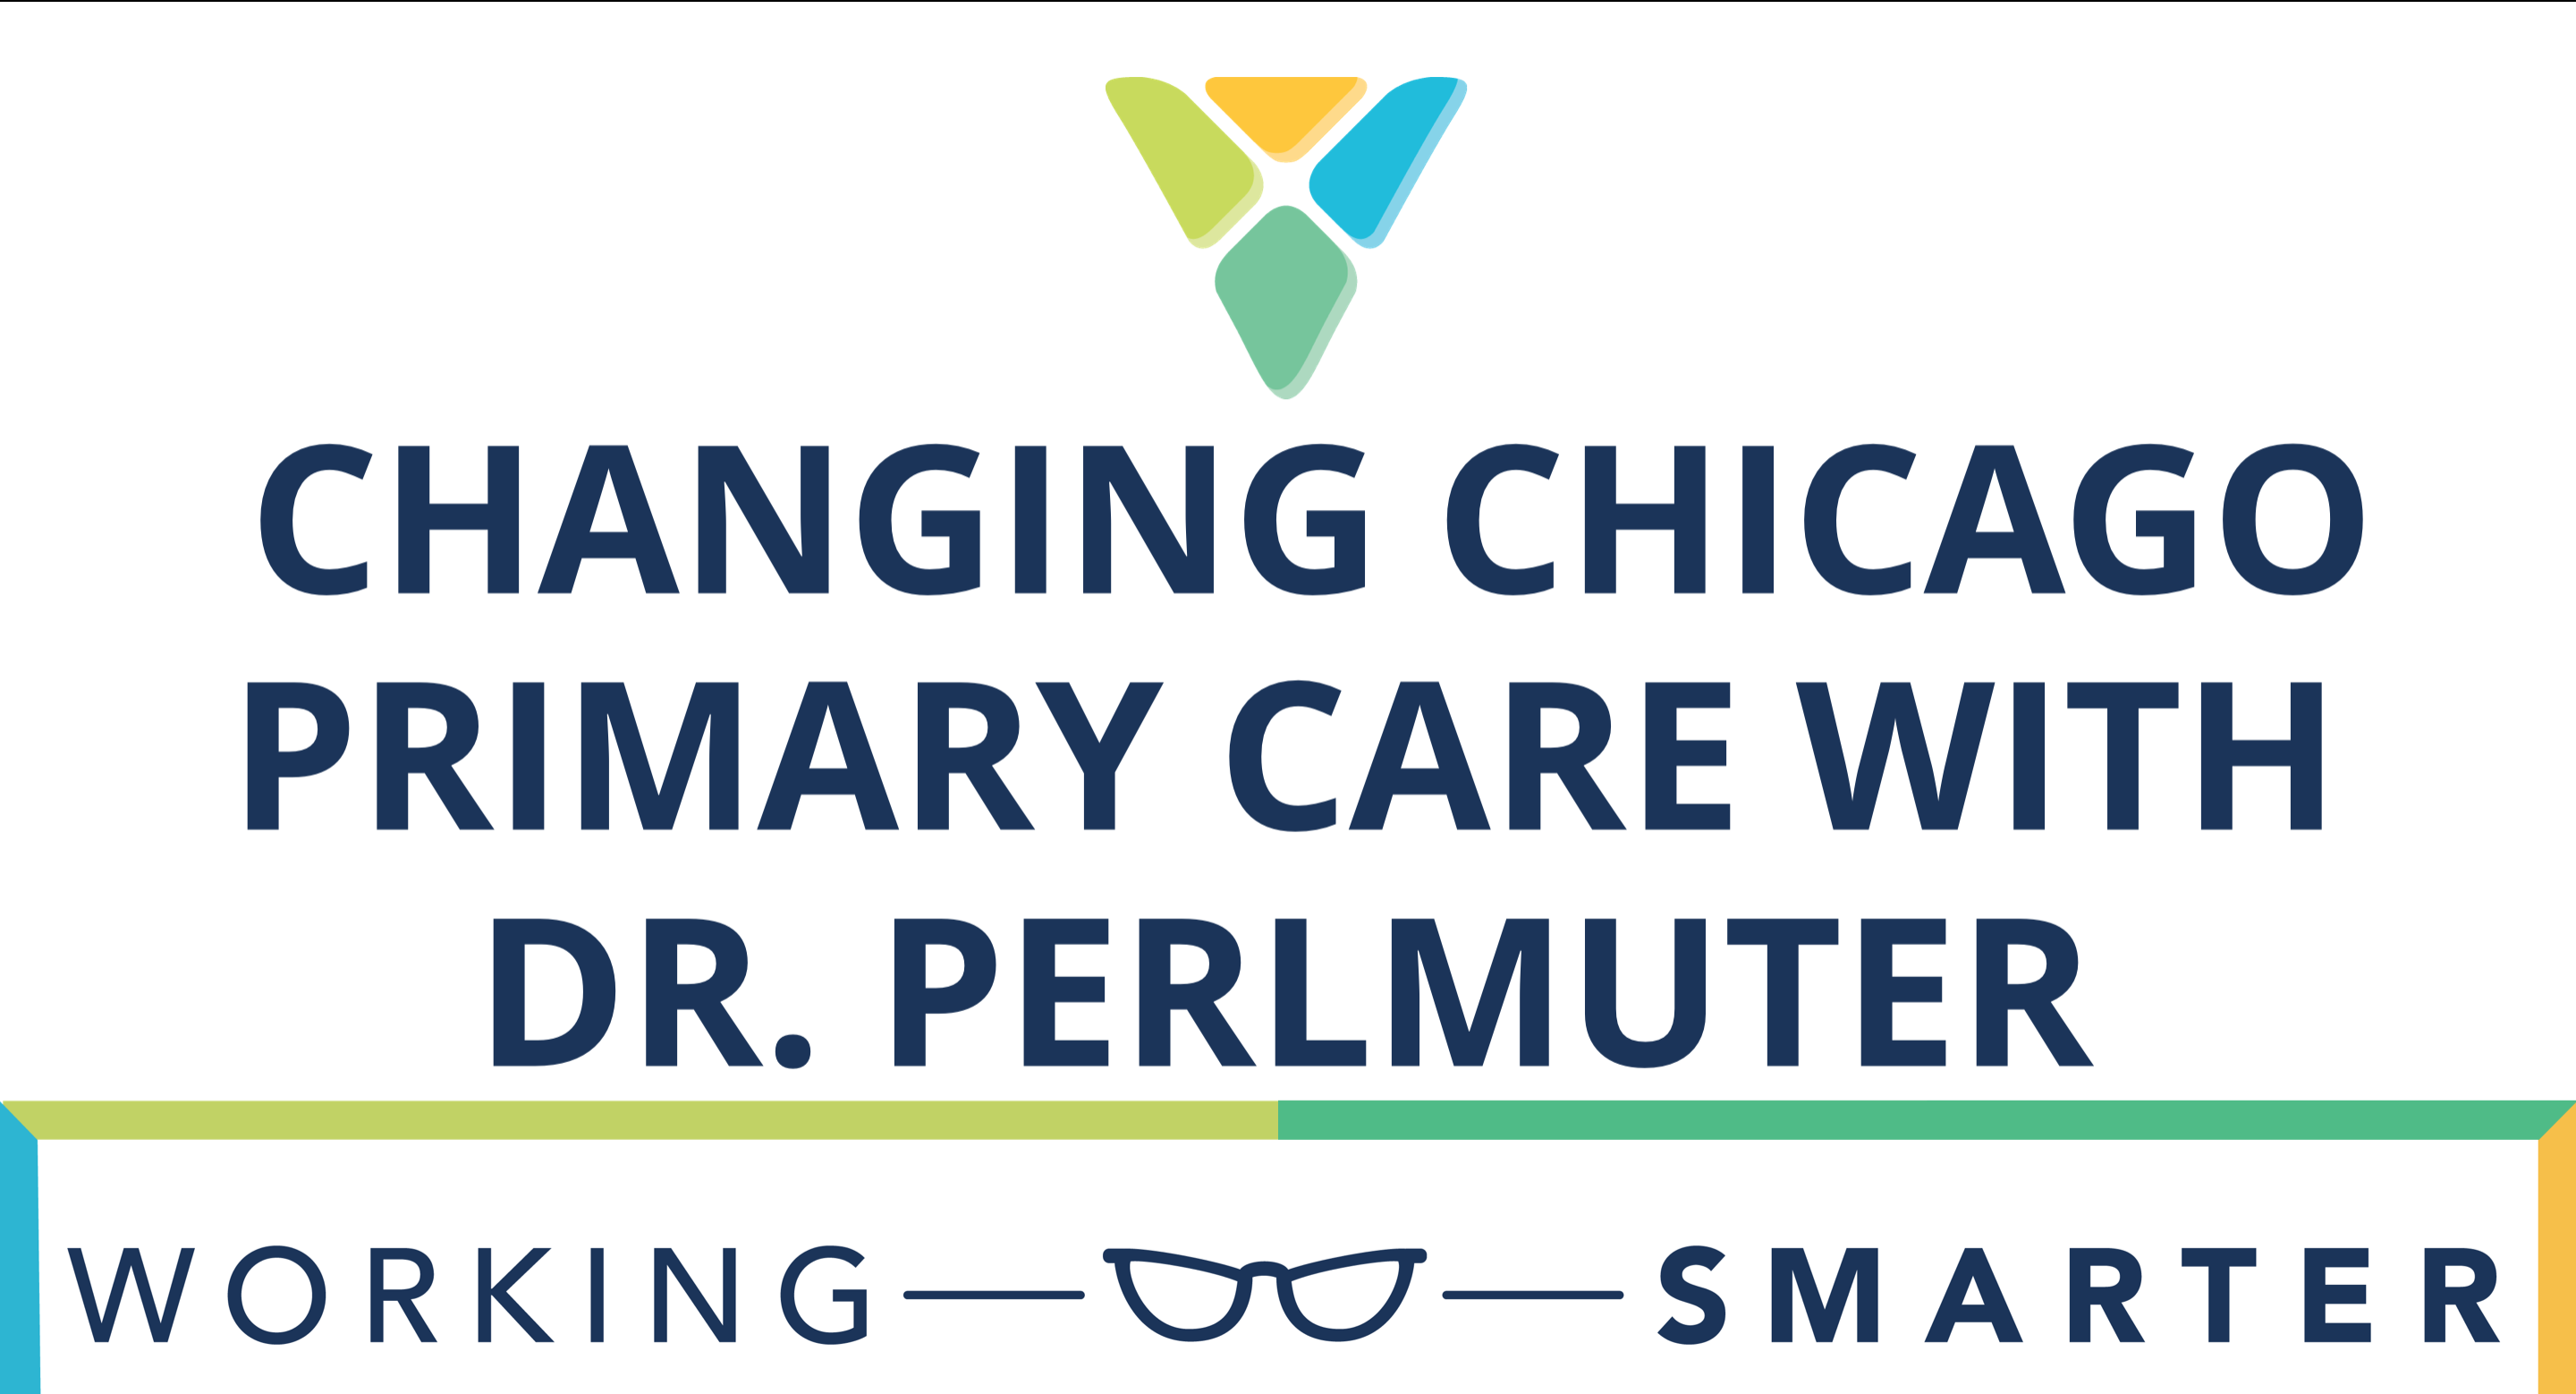 Working Smarter: Around the Village - Changing Chicago Primary Care with Dr. Perlmuter